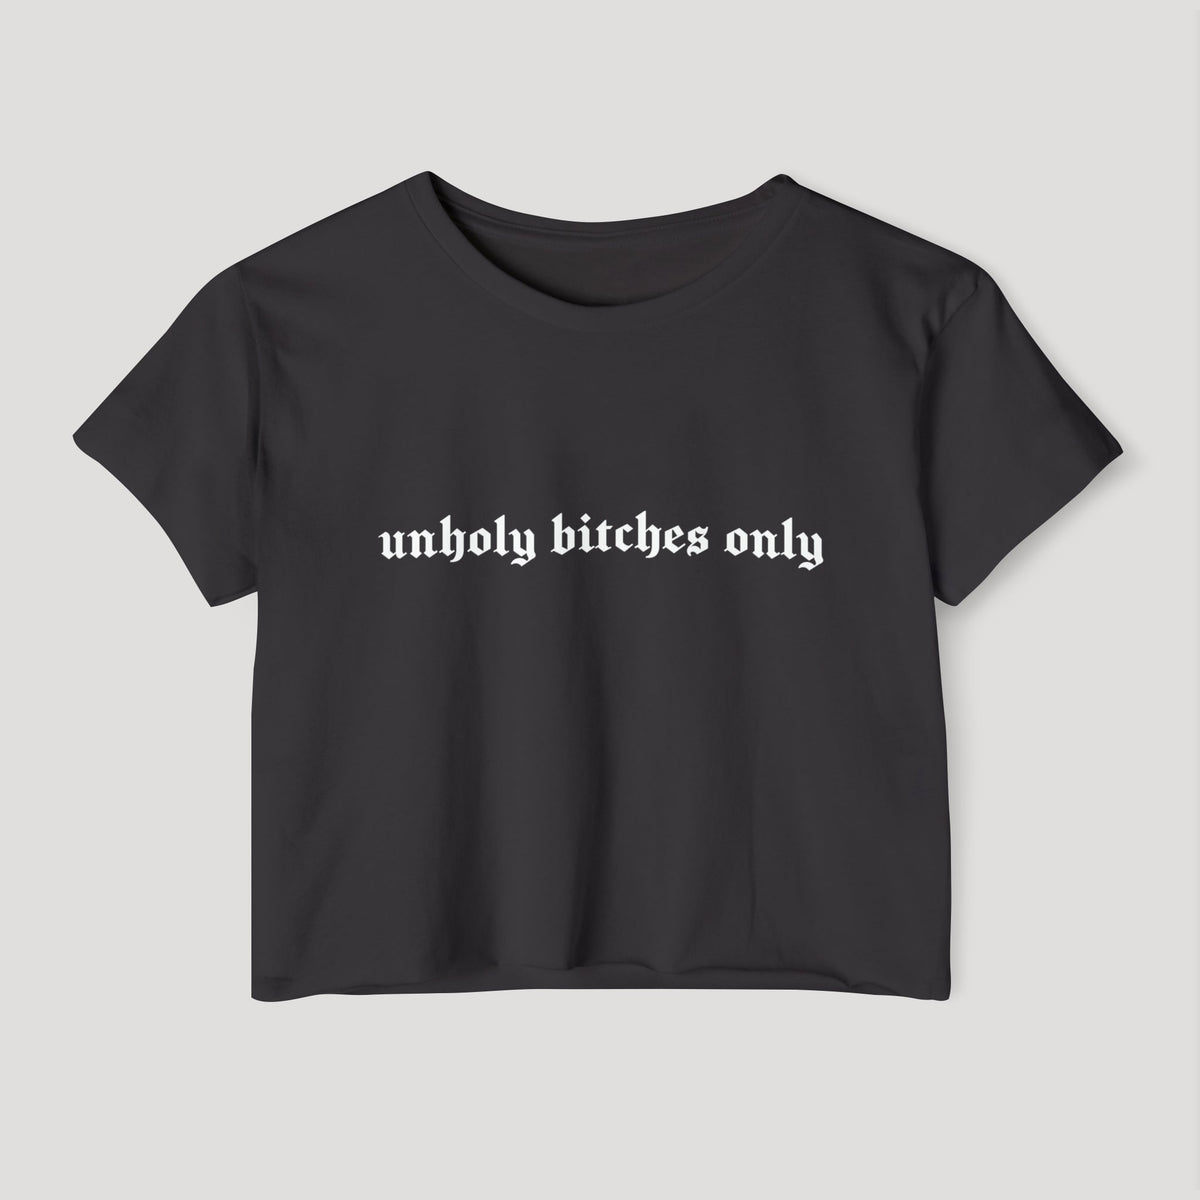 Unholy Bitches Only Women's Lightweight Crop Top (READY TO SHIP) - Goth Cloth Co.20923445789992698000